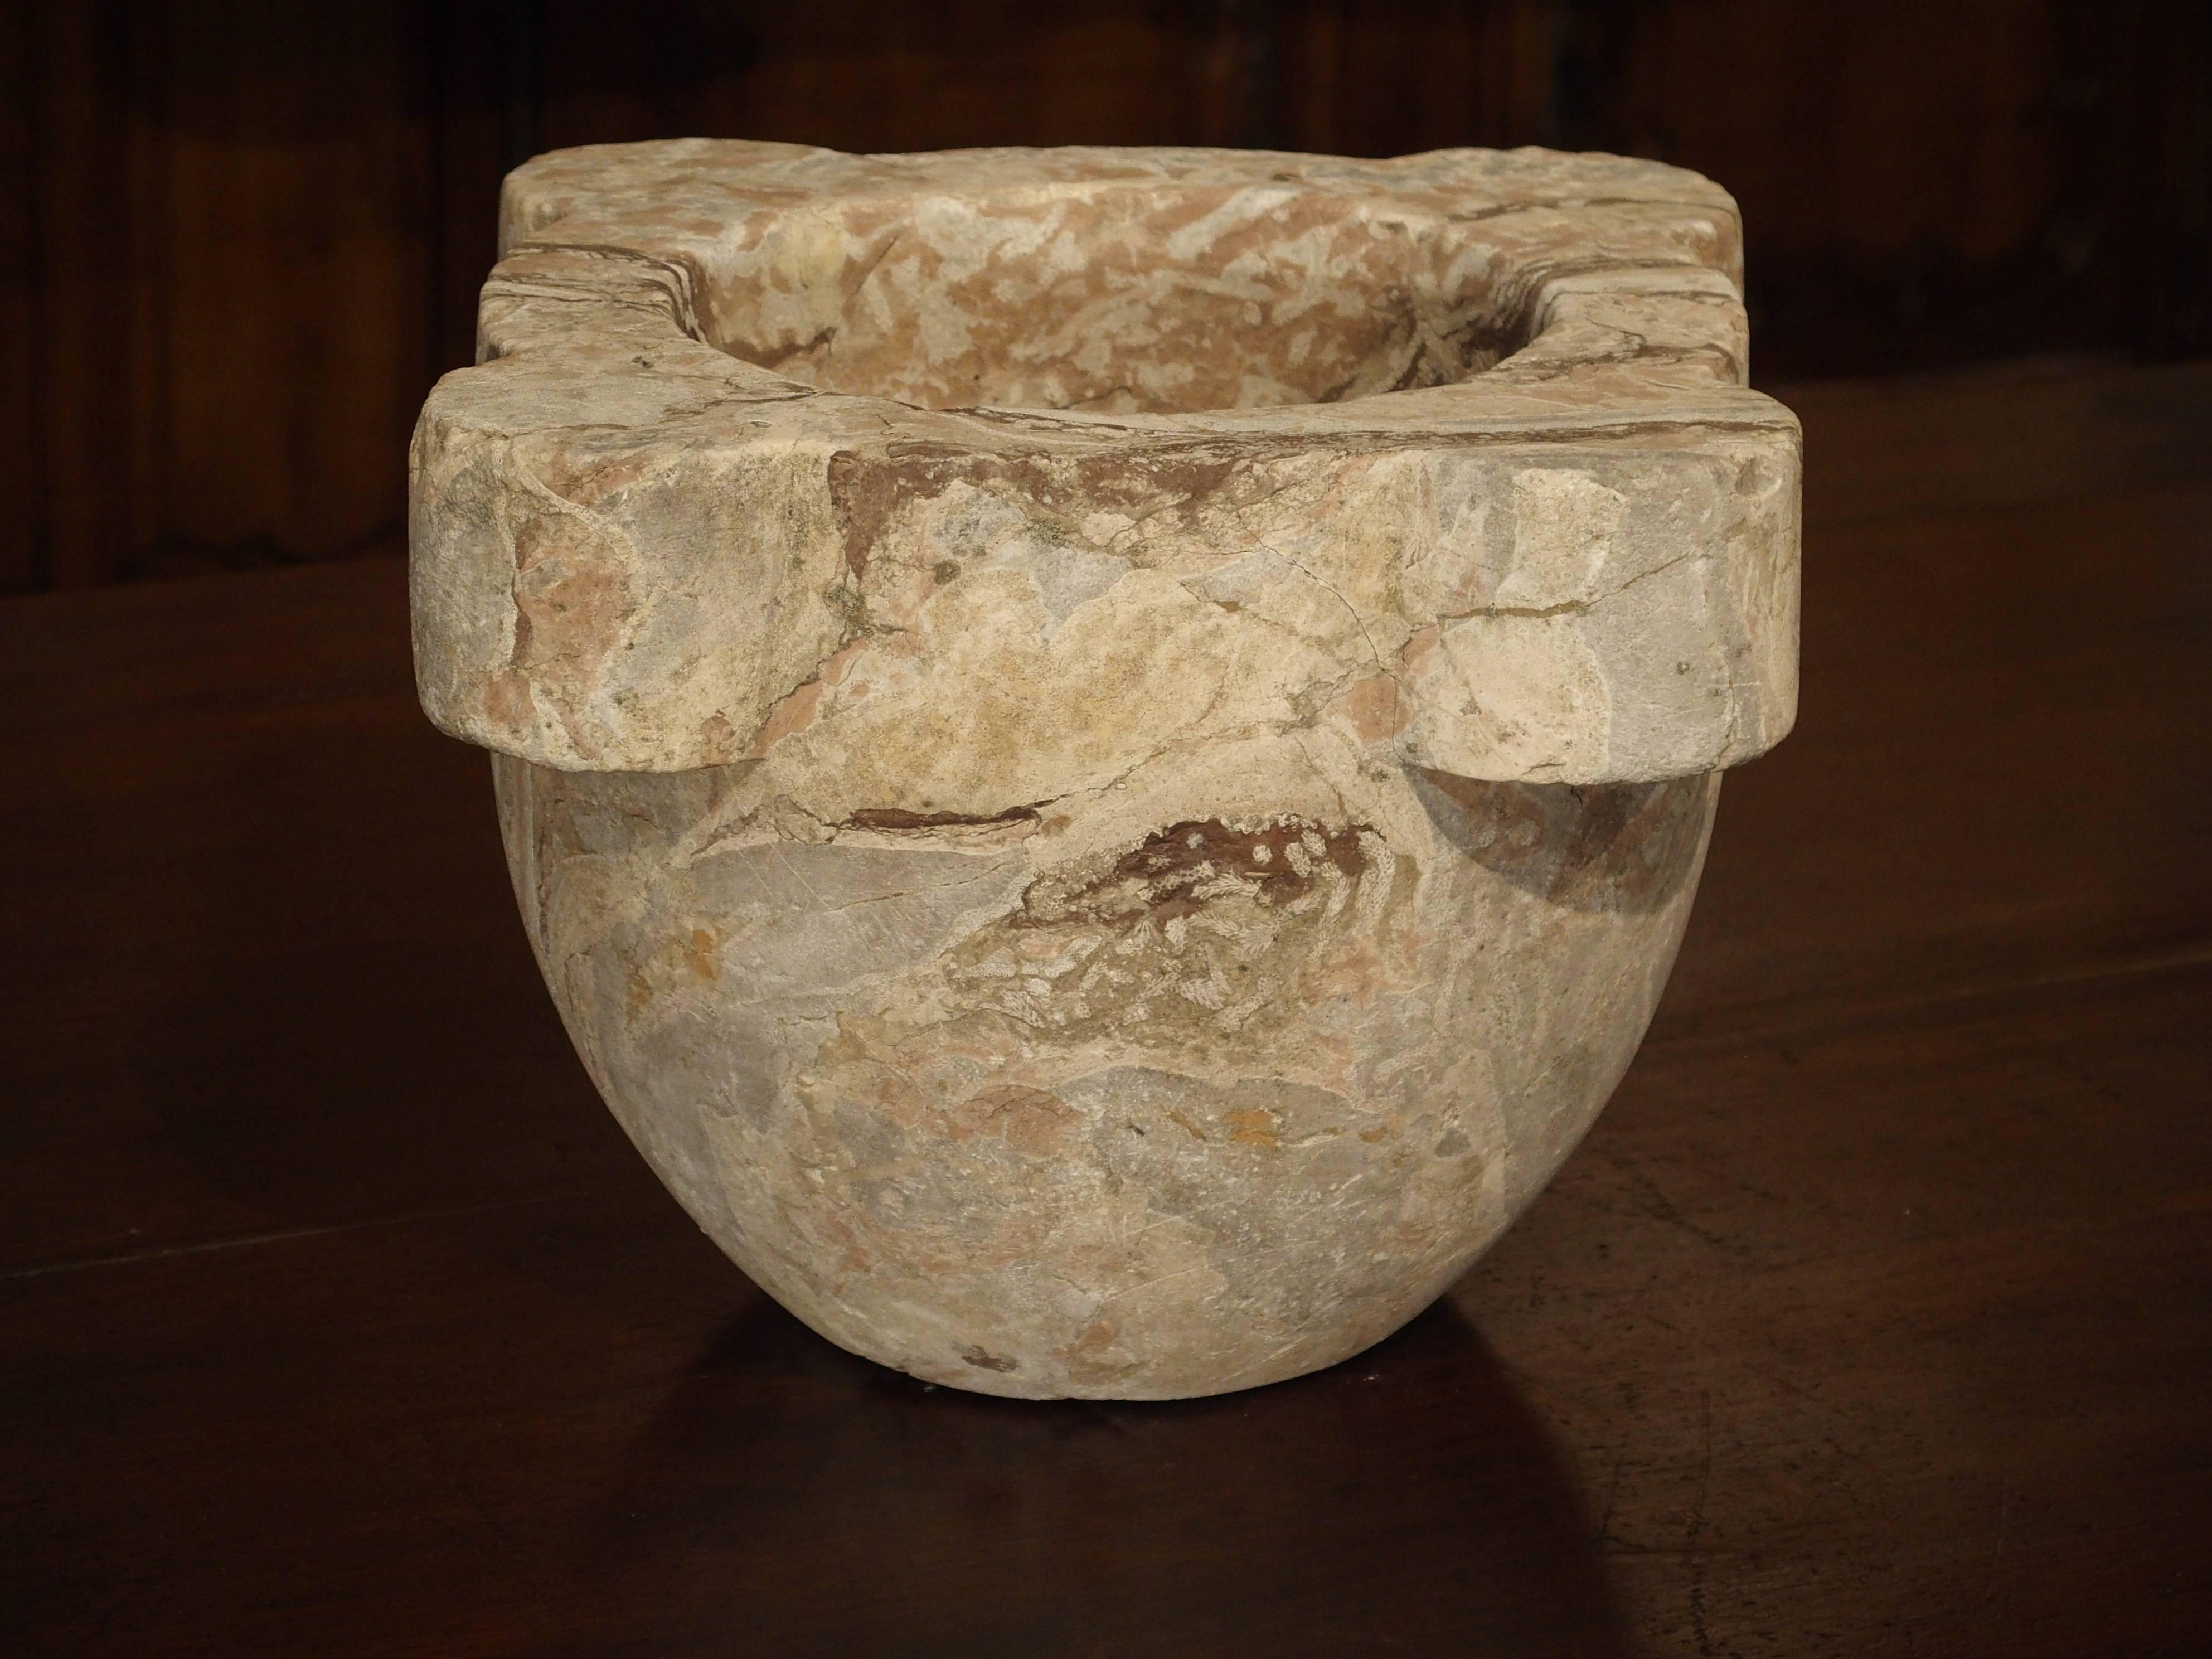 Hand-Carved Antique Rose and Gray Colored Marble Mortar from France